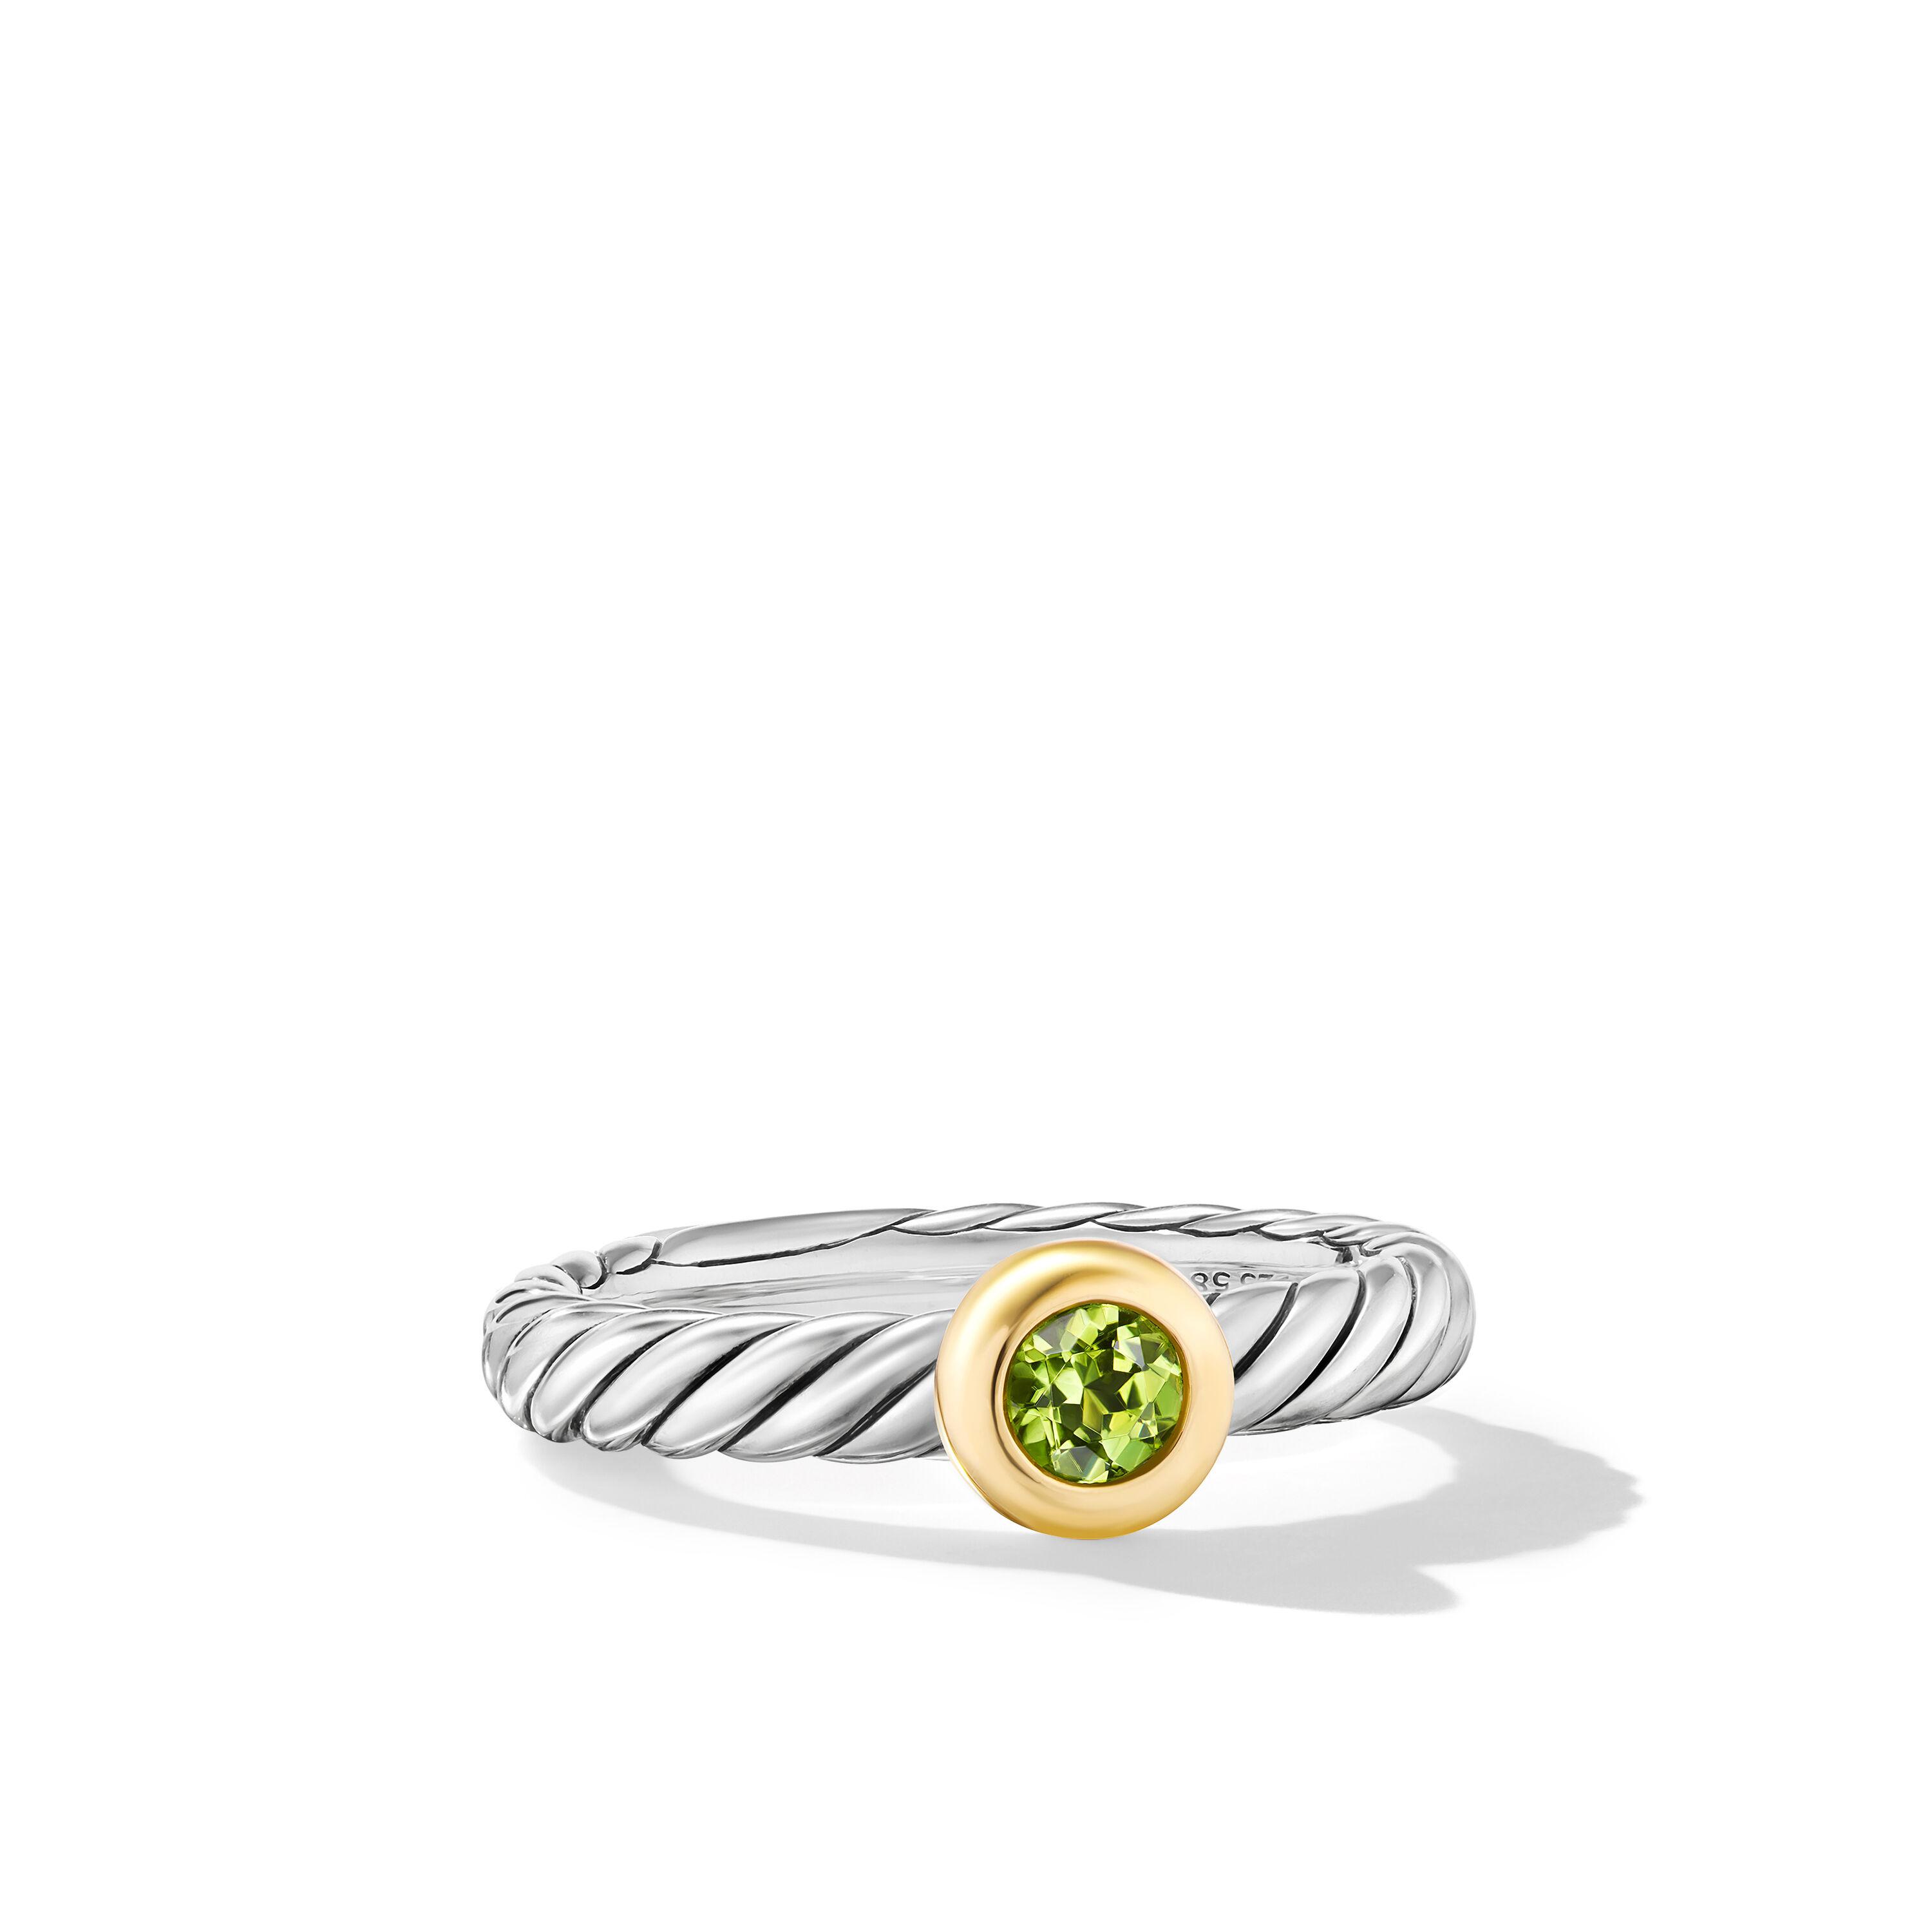 David Yurman Petite Cable Ring in Sterling Silver with 14K Yellow Gold and Peridot, Size 6 0